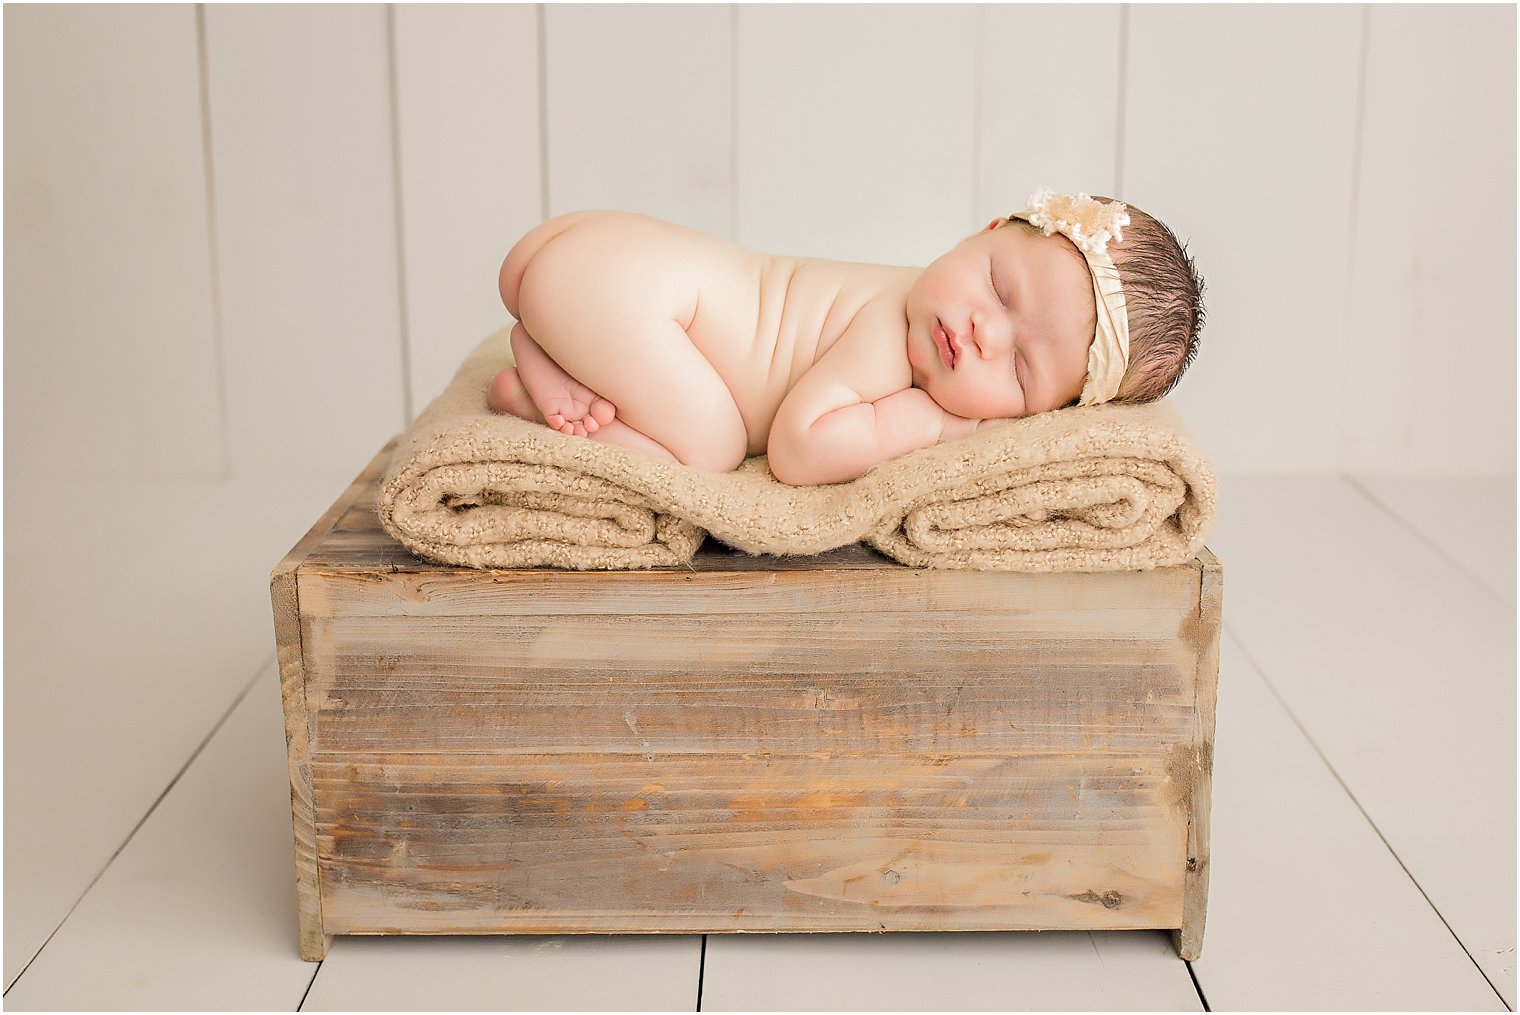 Tushie up pose on wooden crate